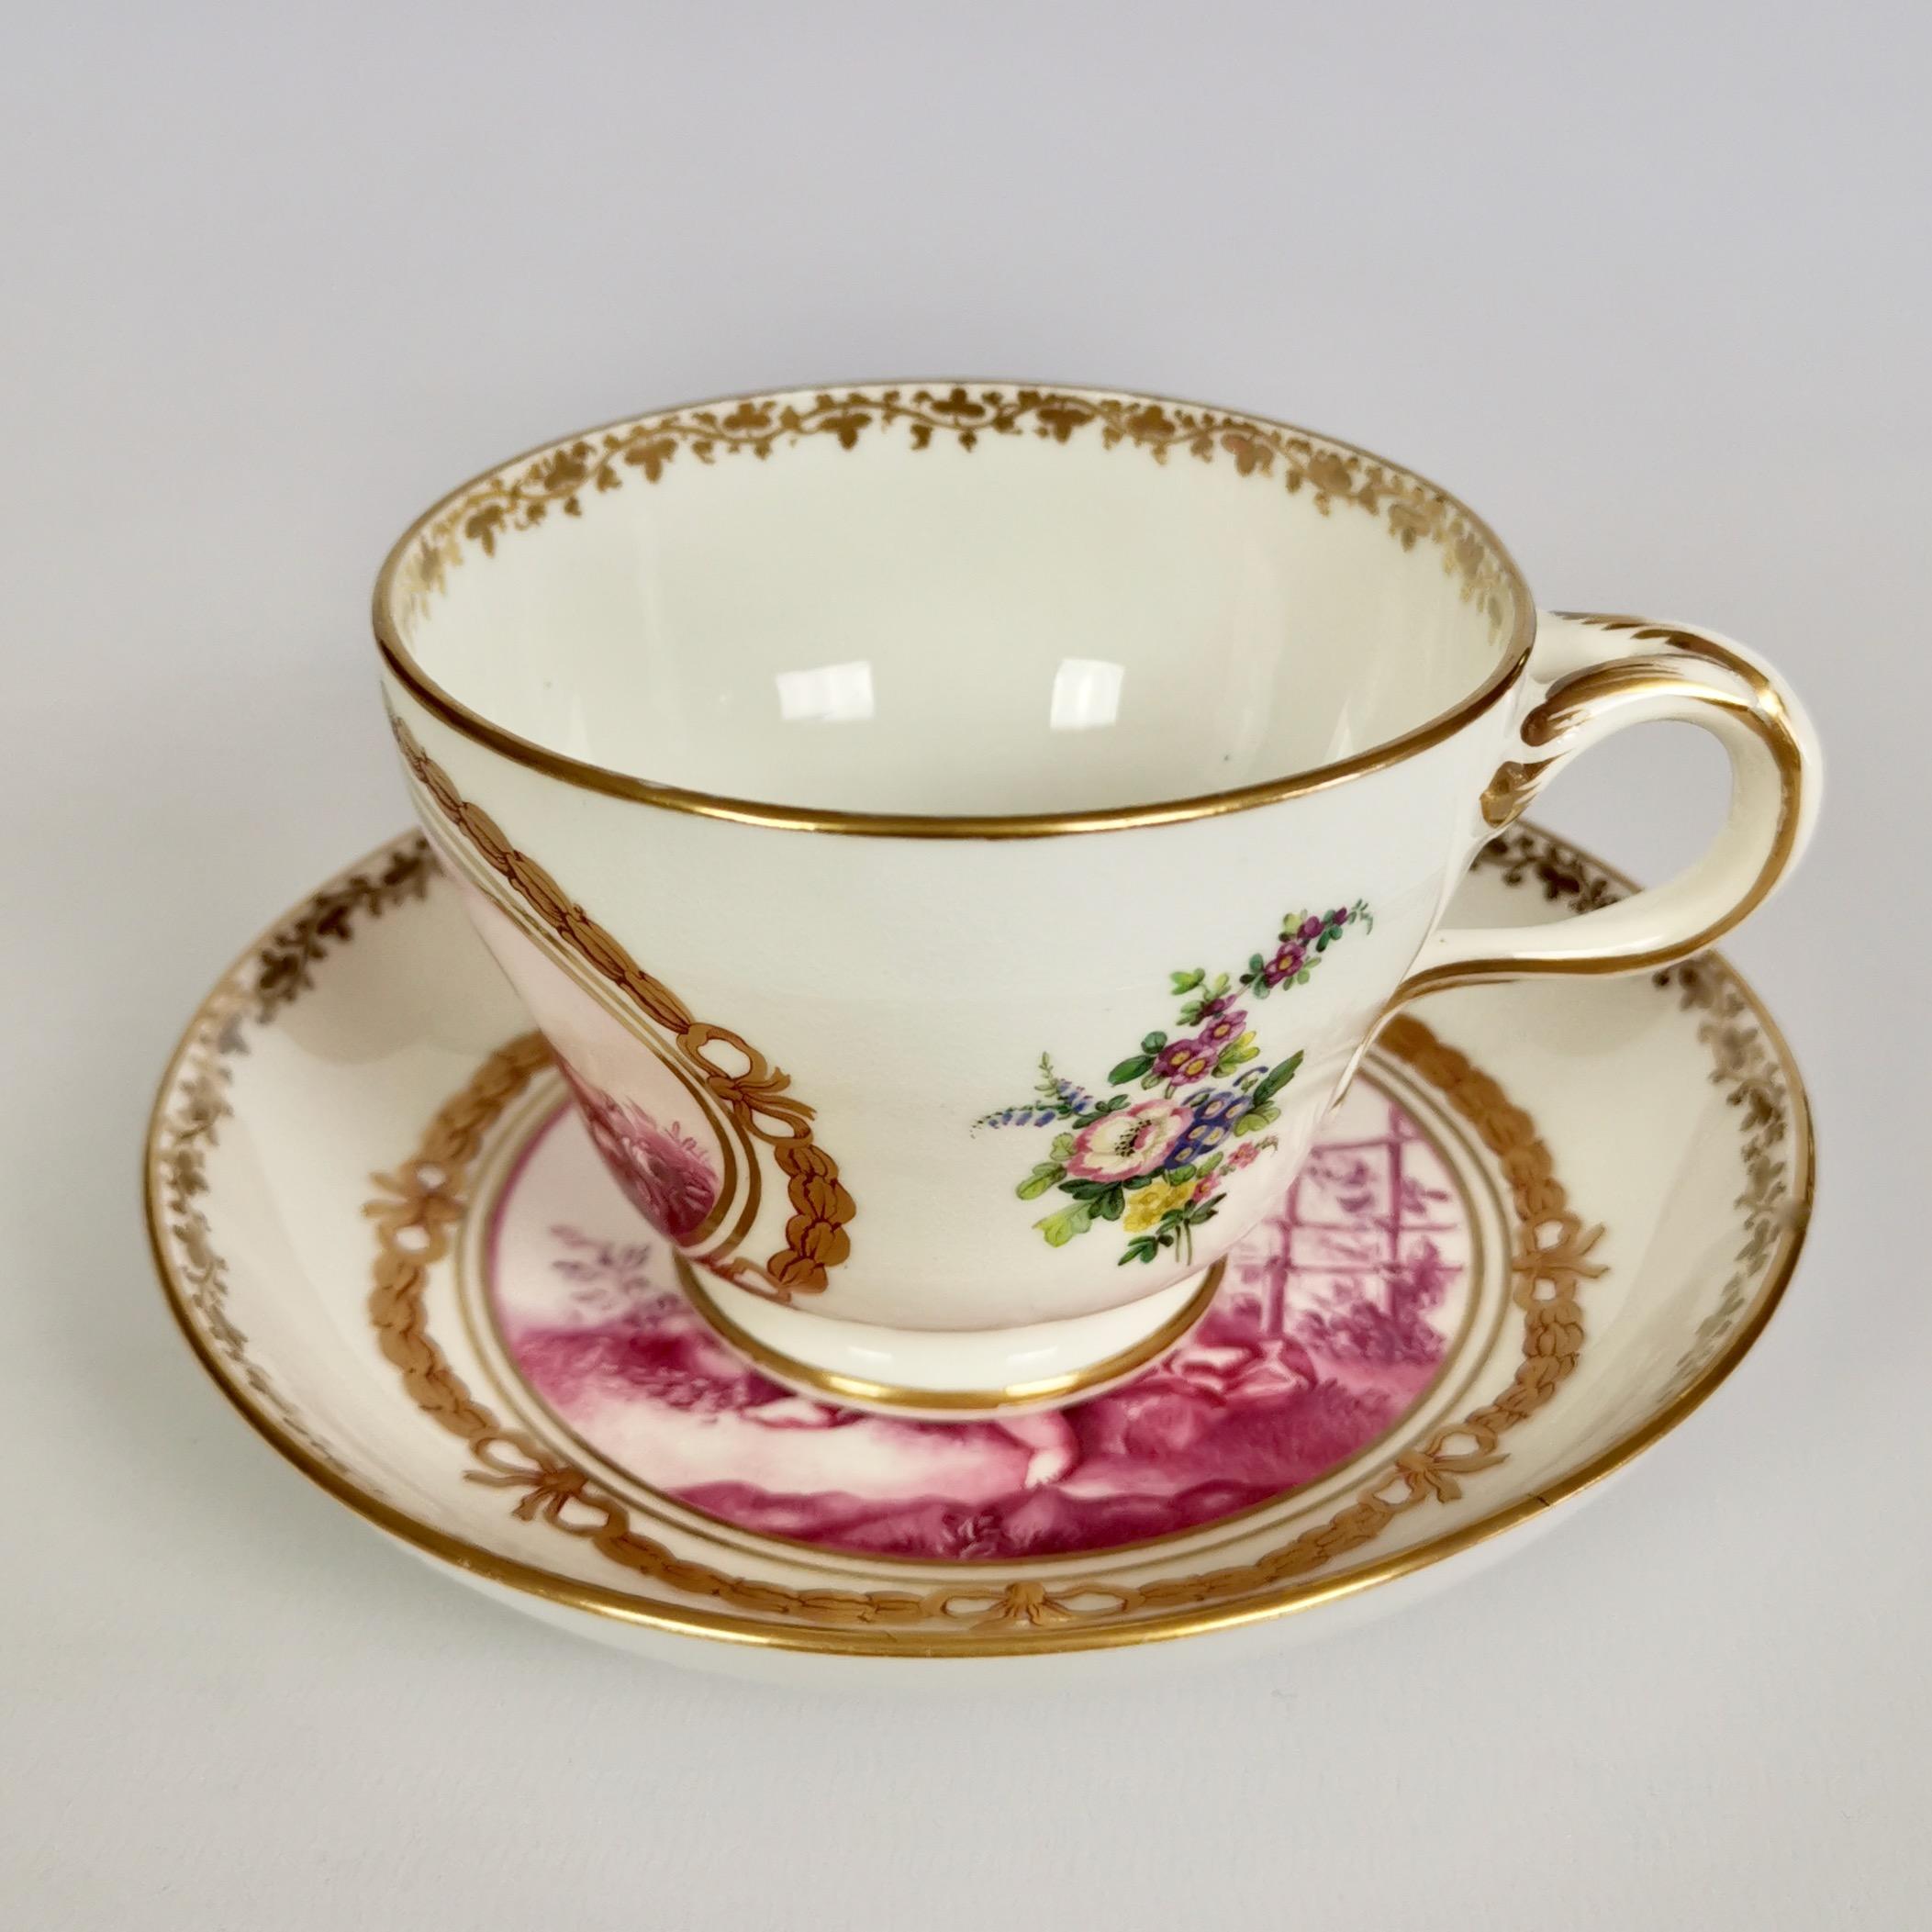 English Kerr & Binns Worcester Porcelain Cup and Saucer, Puce Putti Playing, circa 1855